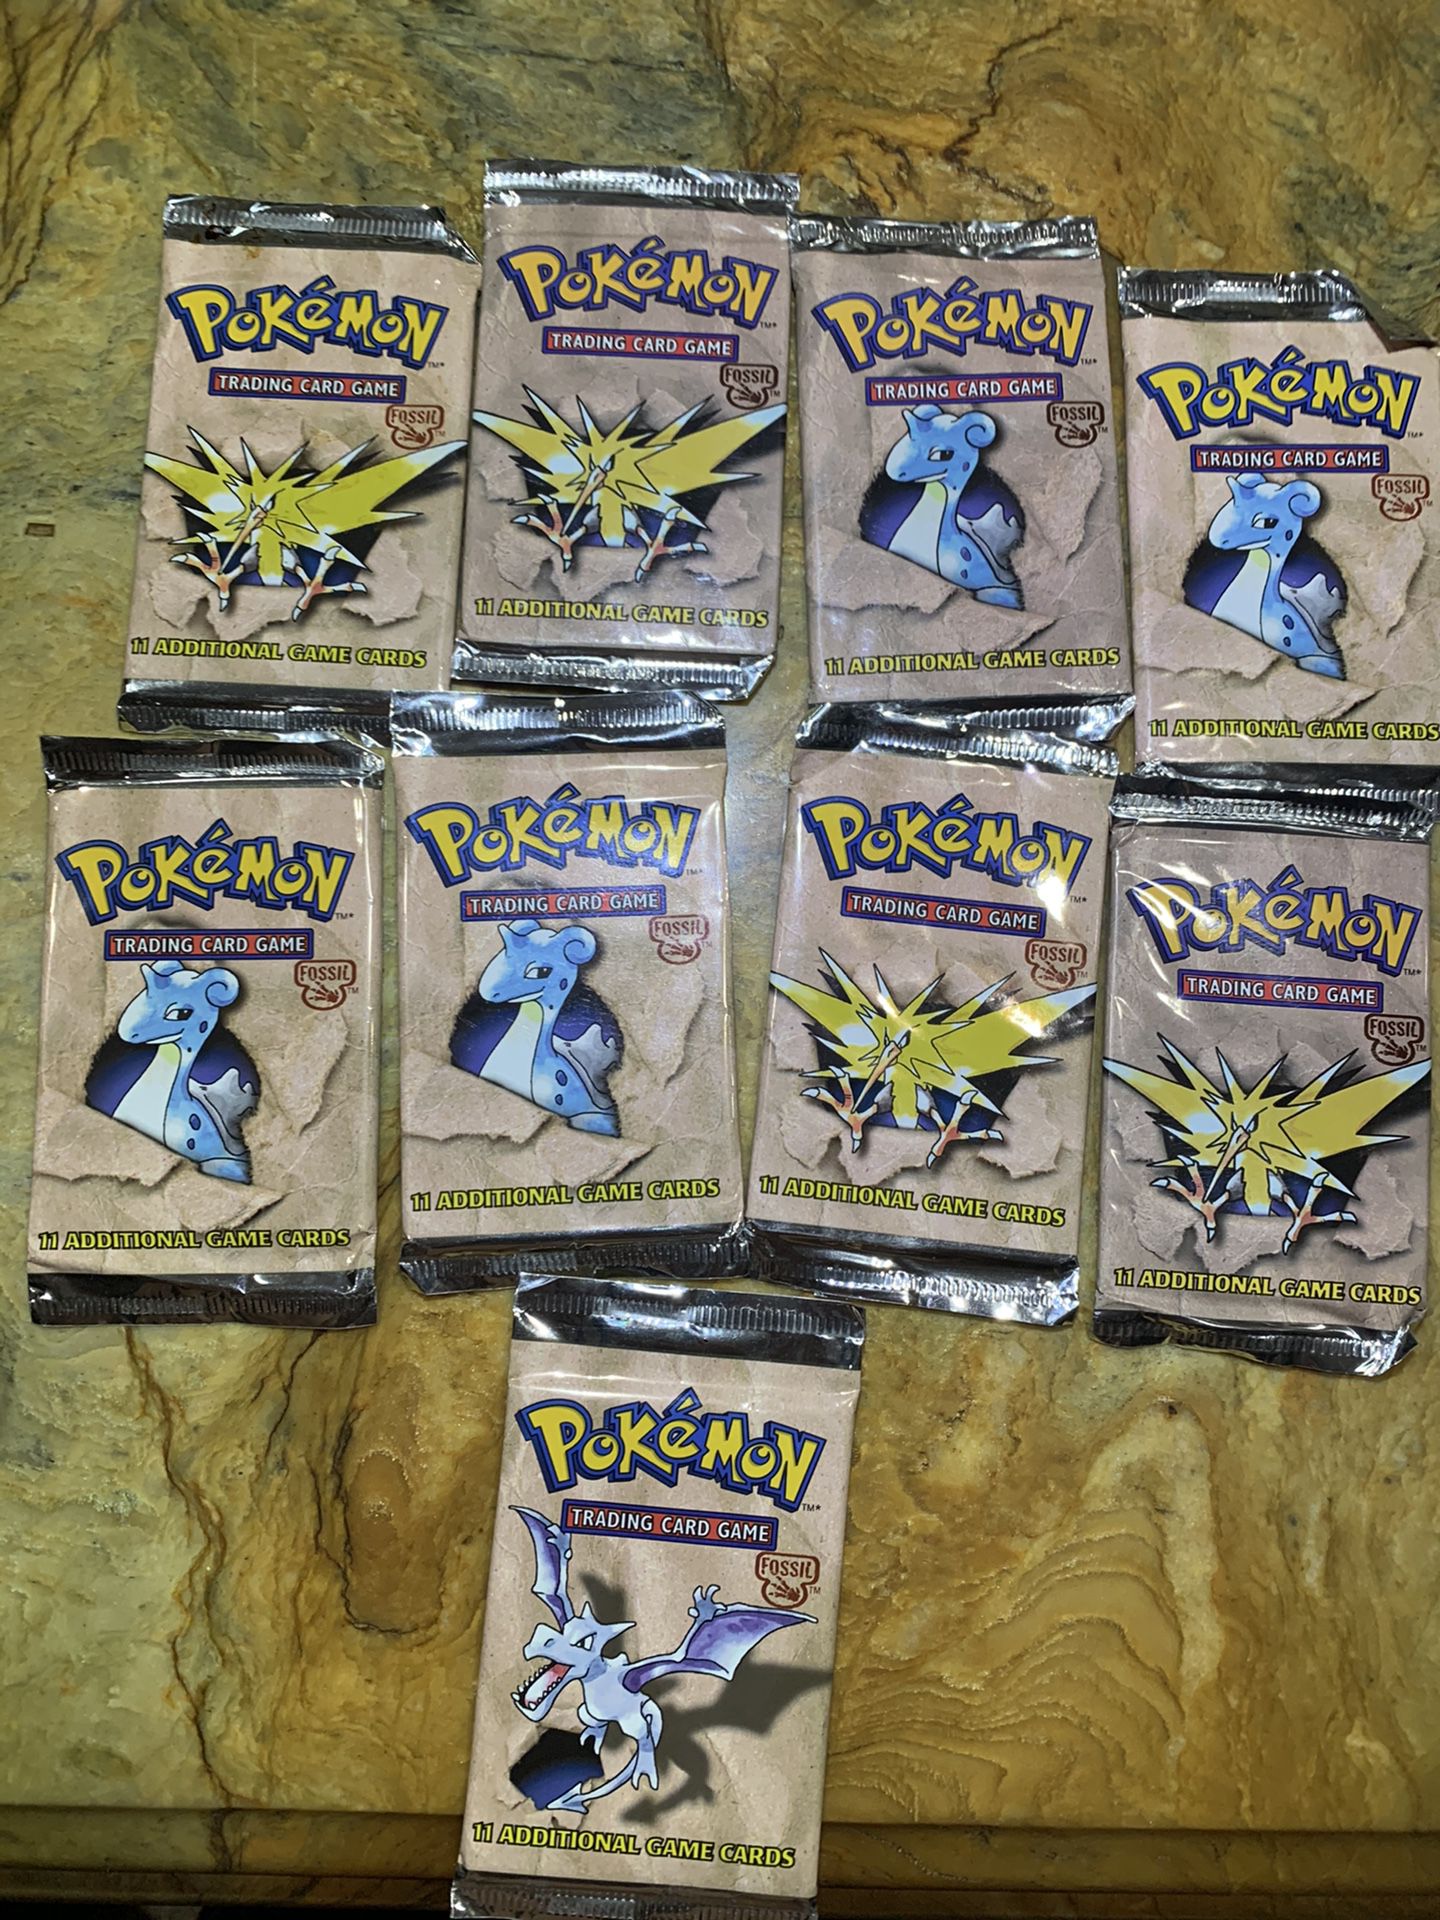 1999 Pokemon foosil unopen booster pack from Wizards of the Coast, These are vintage packs